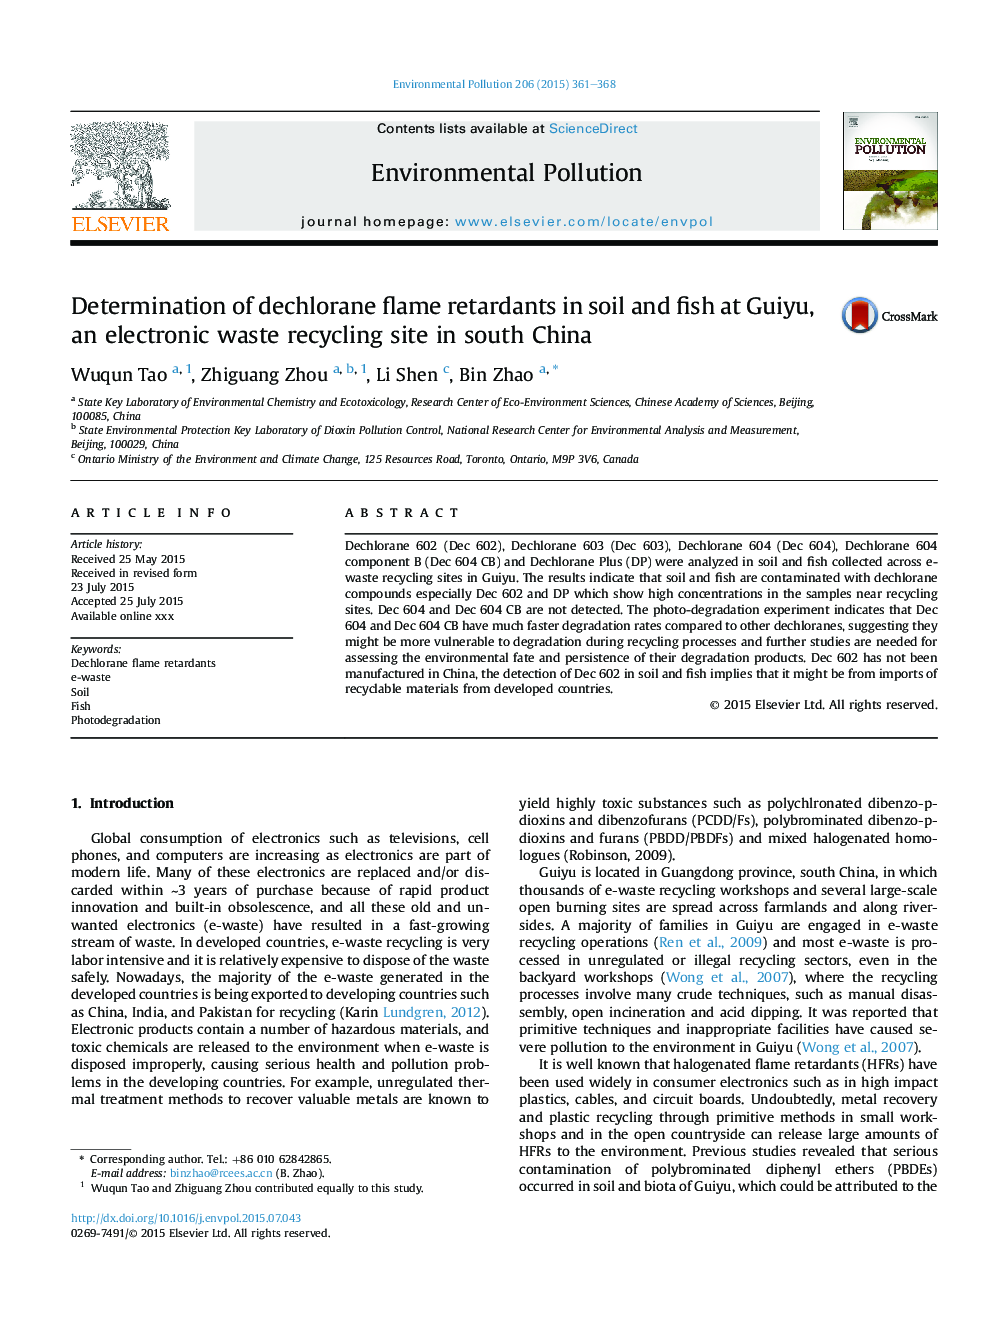 Determination of dechlorane flame retardants in soil and fish at Guiyu, an electronic waste recycling site in south China